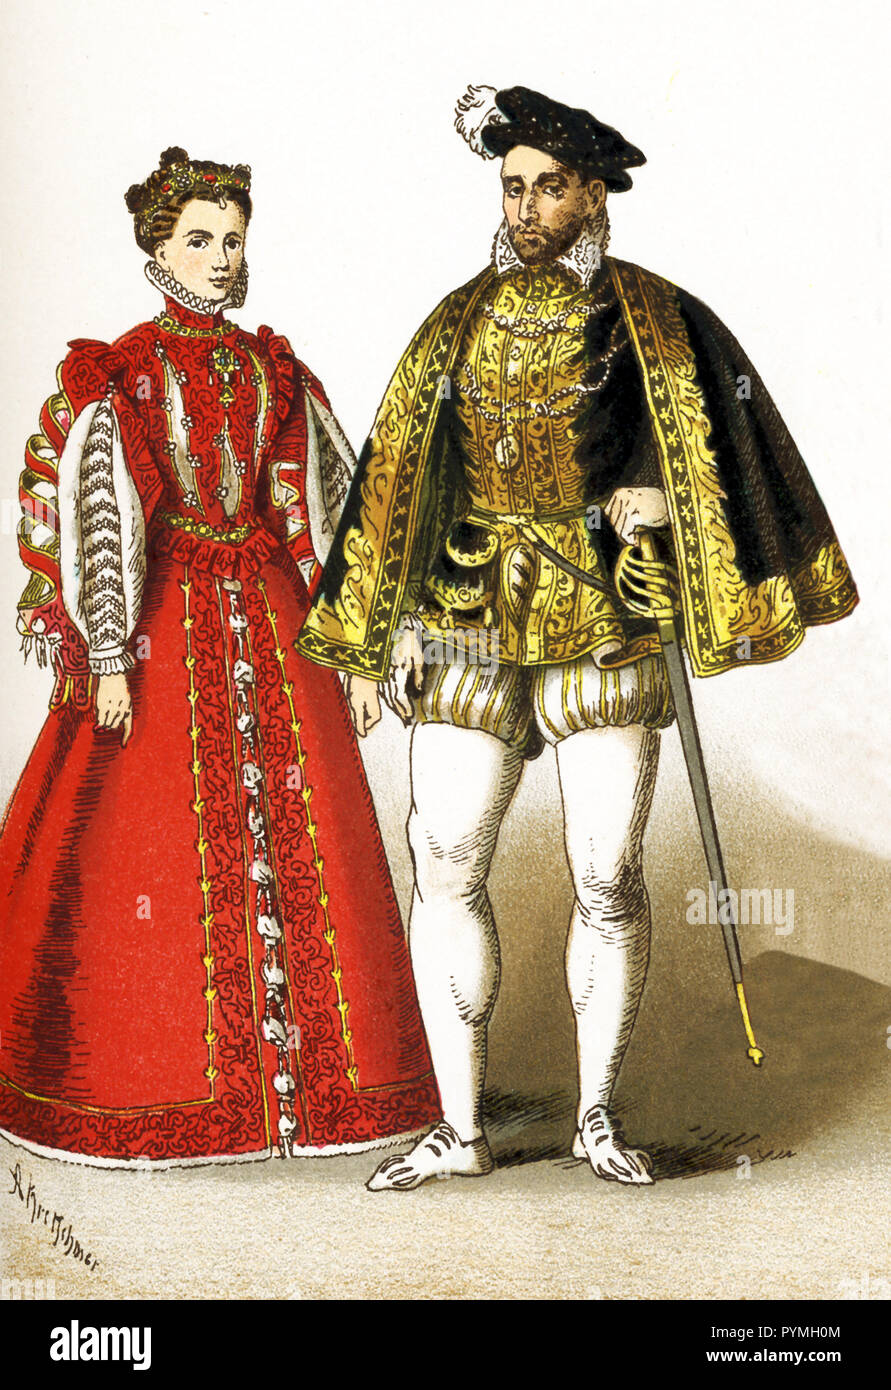 The figures represented here are all French people between 1550 and 1600. They are Elizabeth (also Elizabeth of Valois - daughter of Henry II, third wife of Philip II of Spain) and Henry II (died 1559). This illustration dates to 1882. Stock Photo